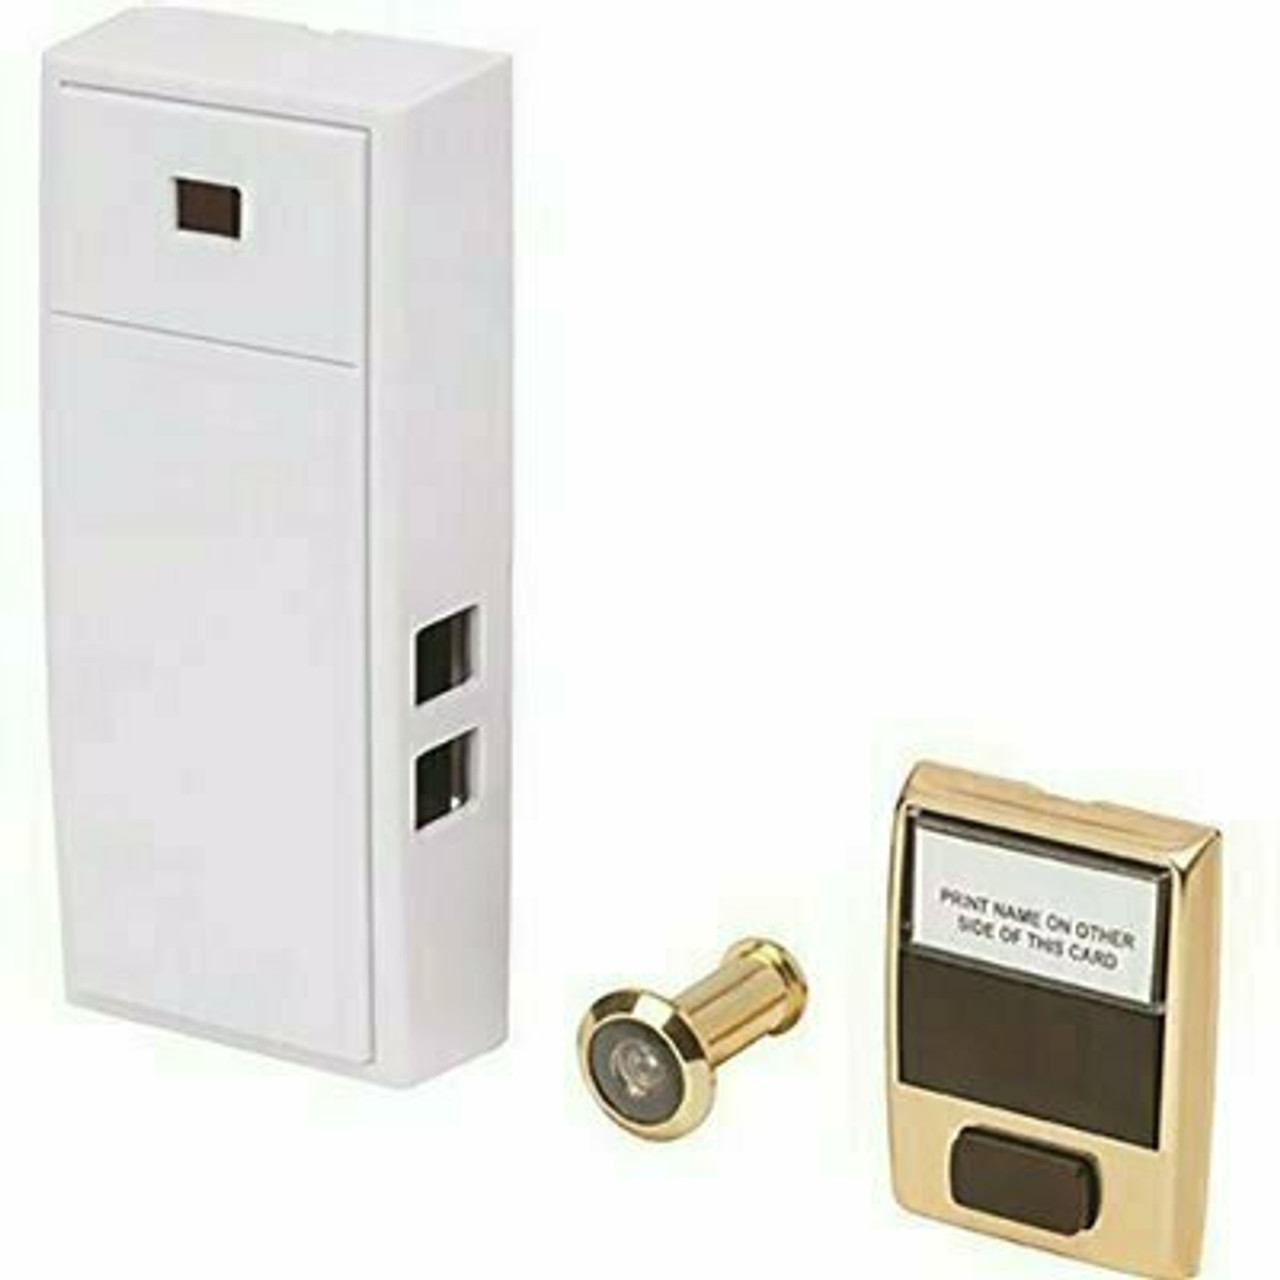 Newhouse Hardware 2-Note Mechanical Wireless Doorbell Chime And Doorbell Push Button With Separate Door Viewer